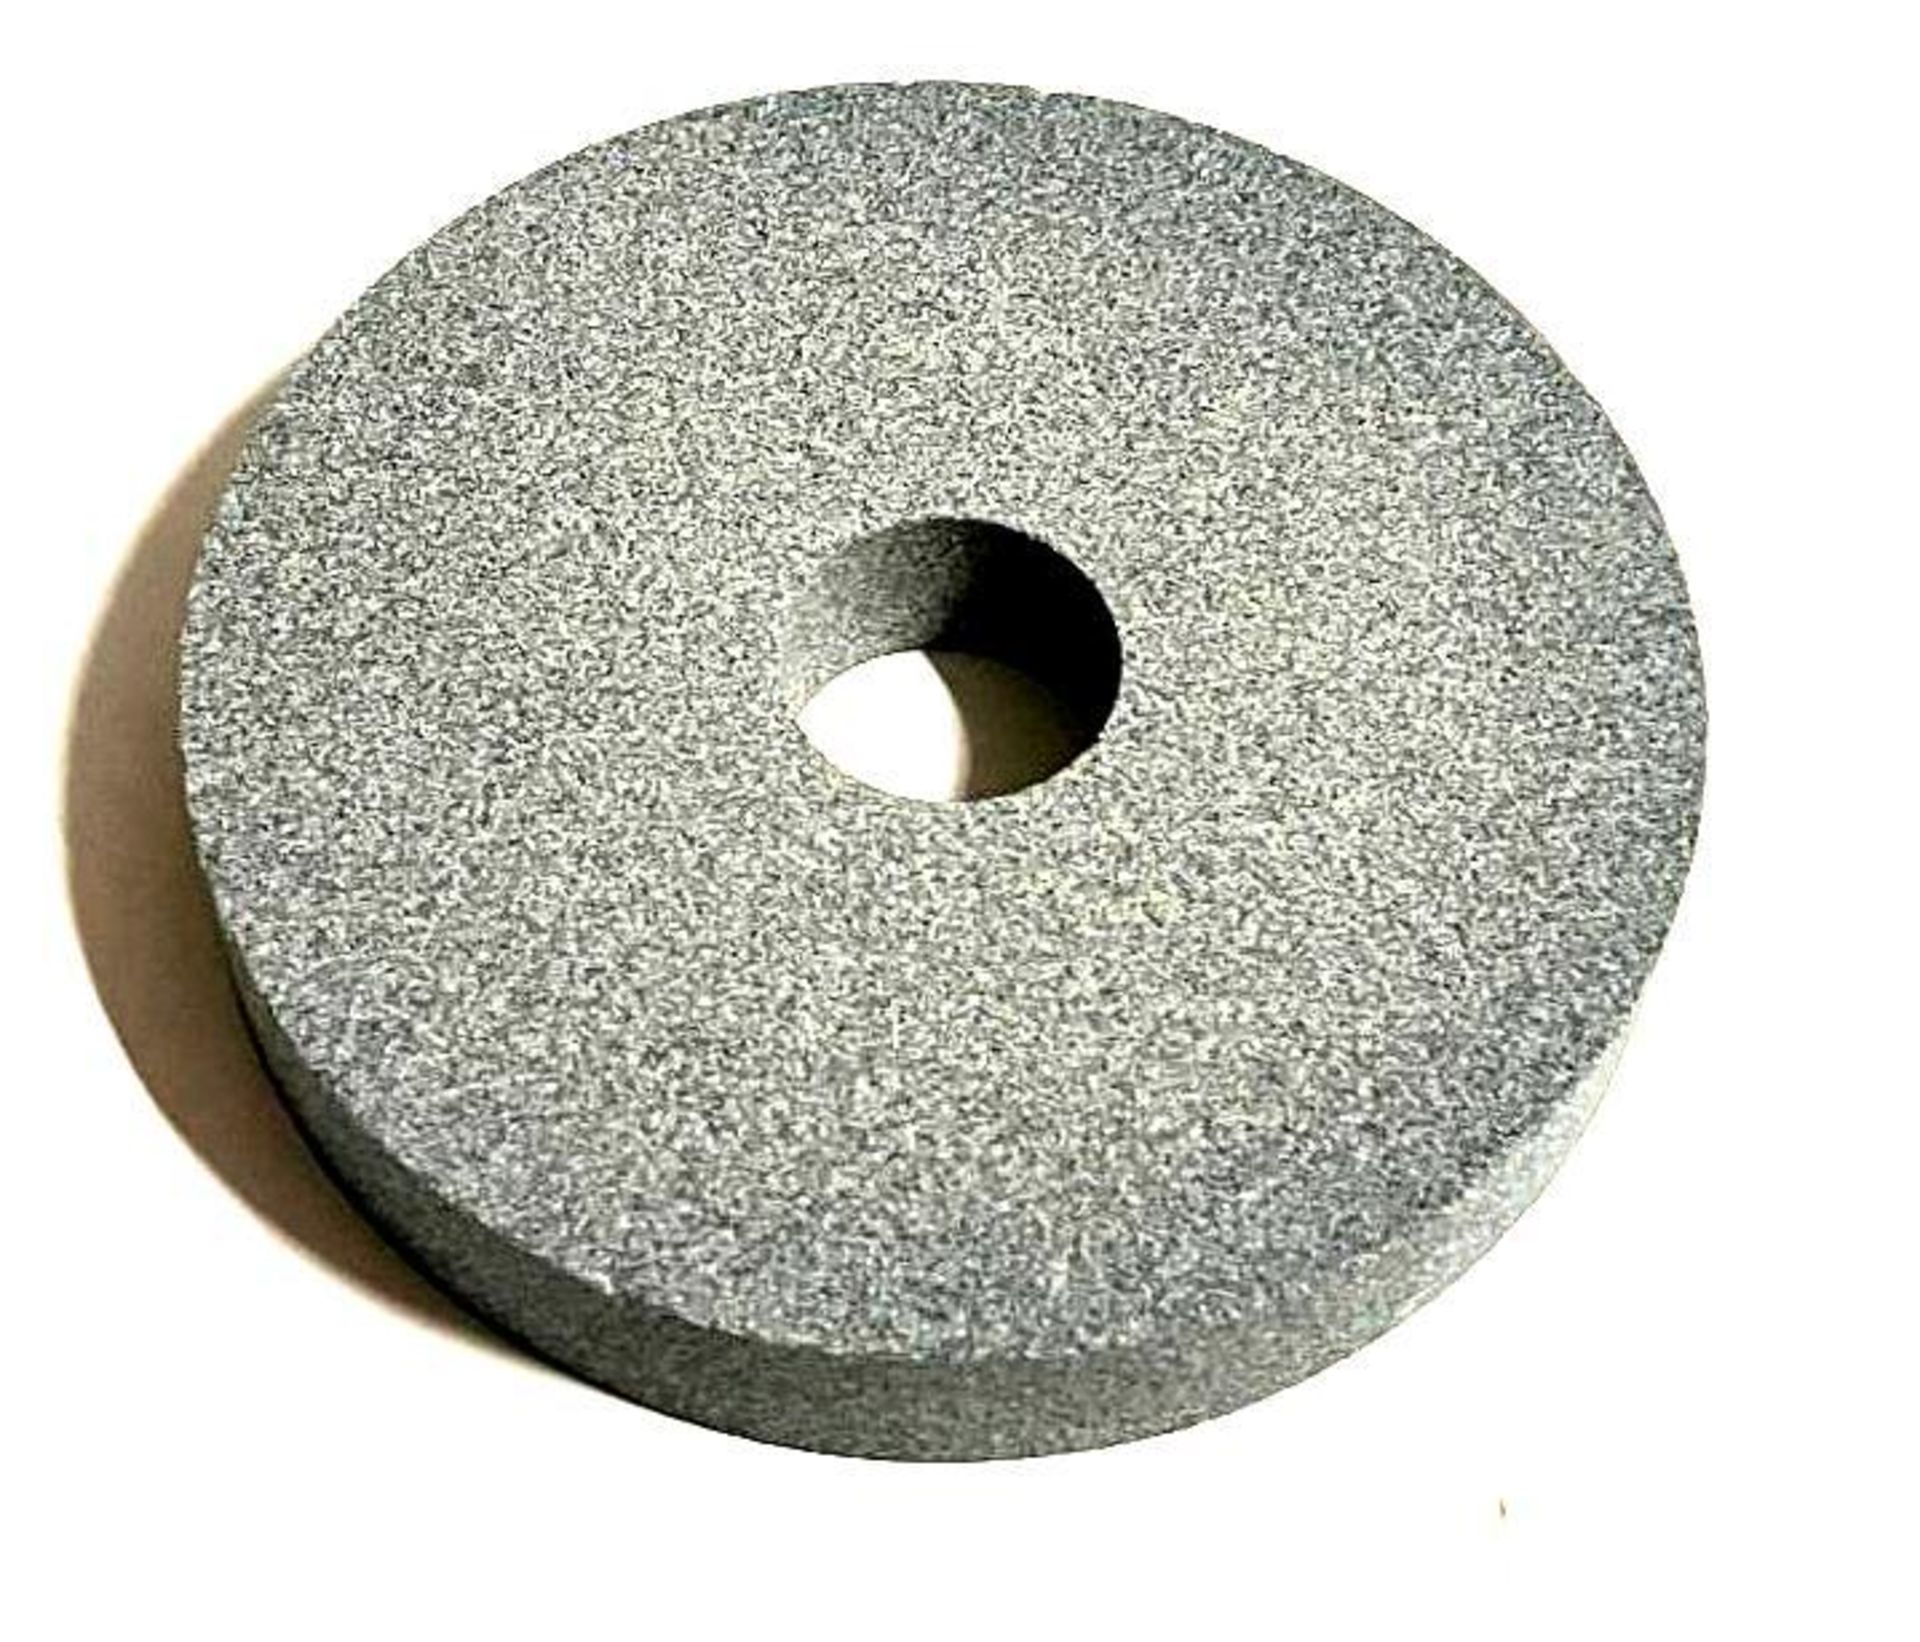 80CT 4.5" FINE GRINDING WHEEL BRAND/MODEL EAZYPOWER 87880 ADDITIONAL INFO TOTAL LOT RETAIL PRICE: $1